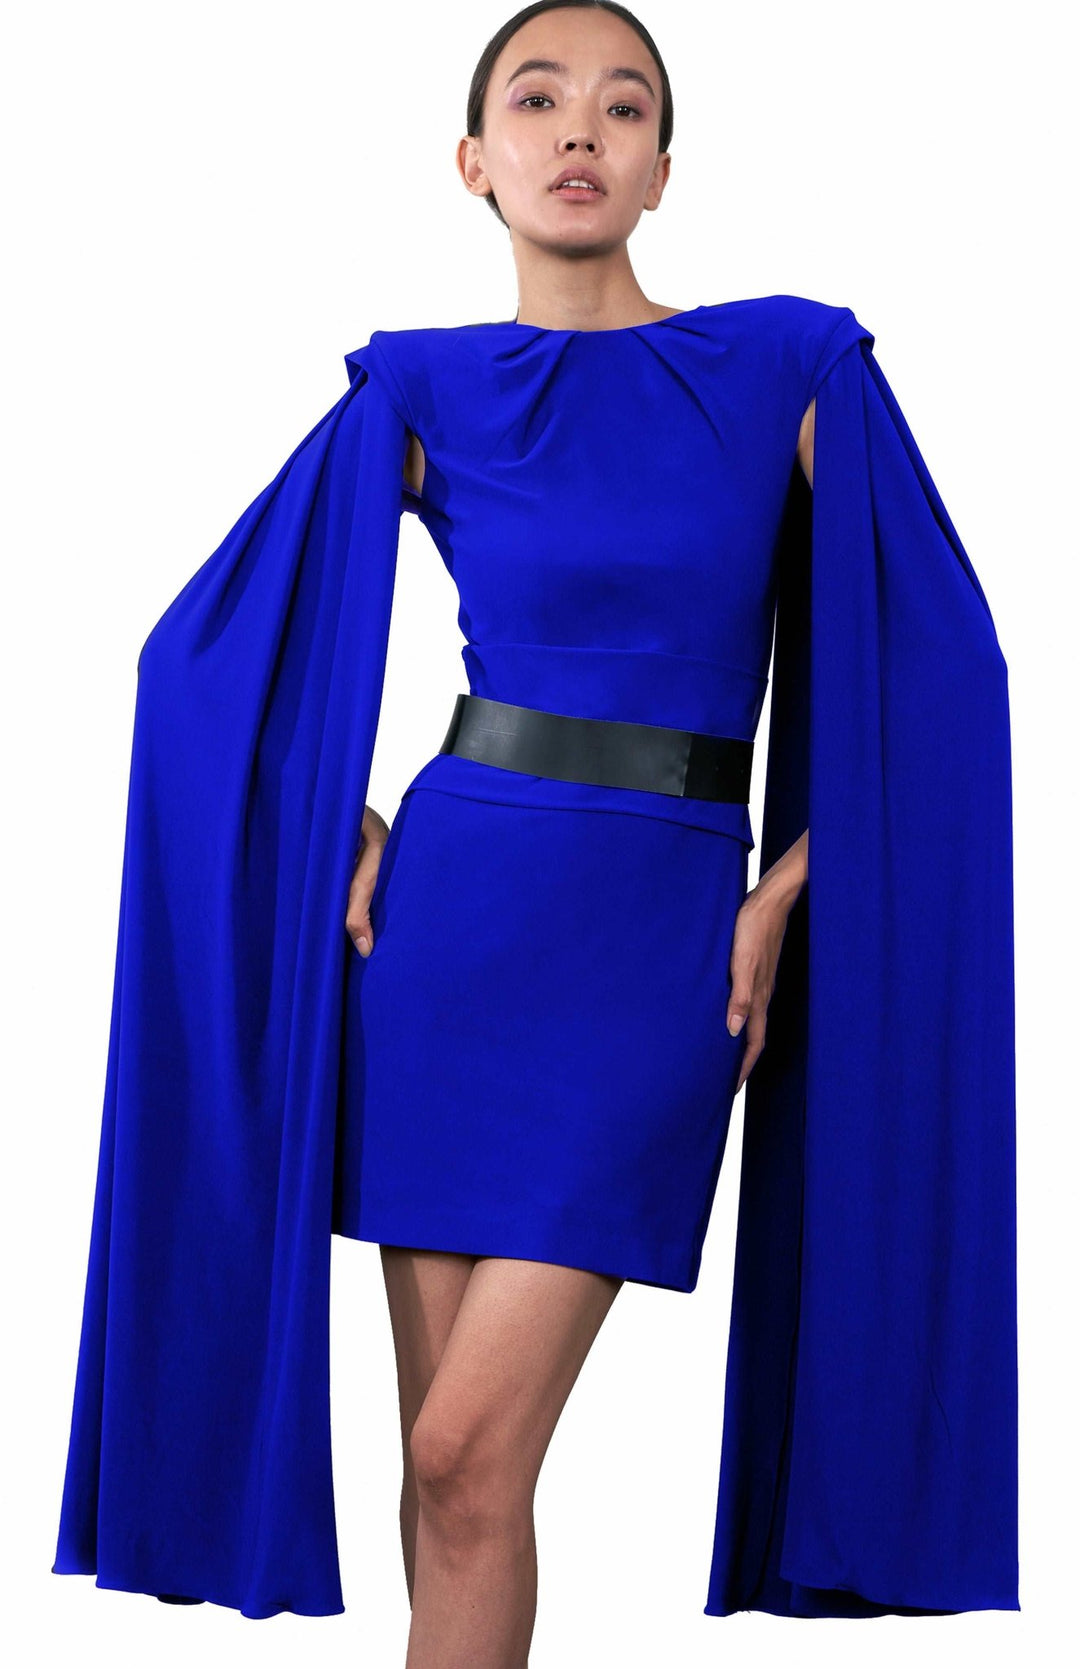  Short, electric blue ,cape sleeve dress in jersey knit with shoulder pads and pleated detail.